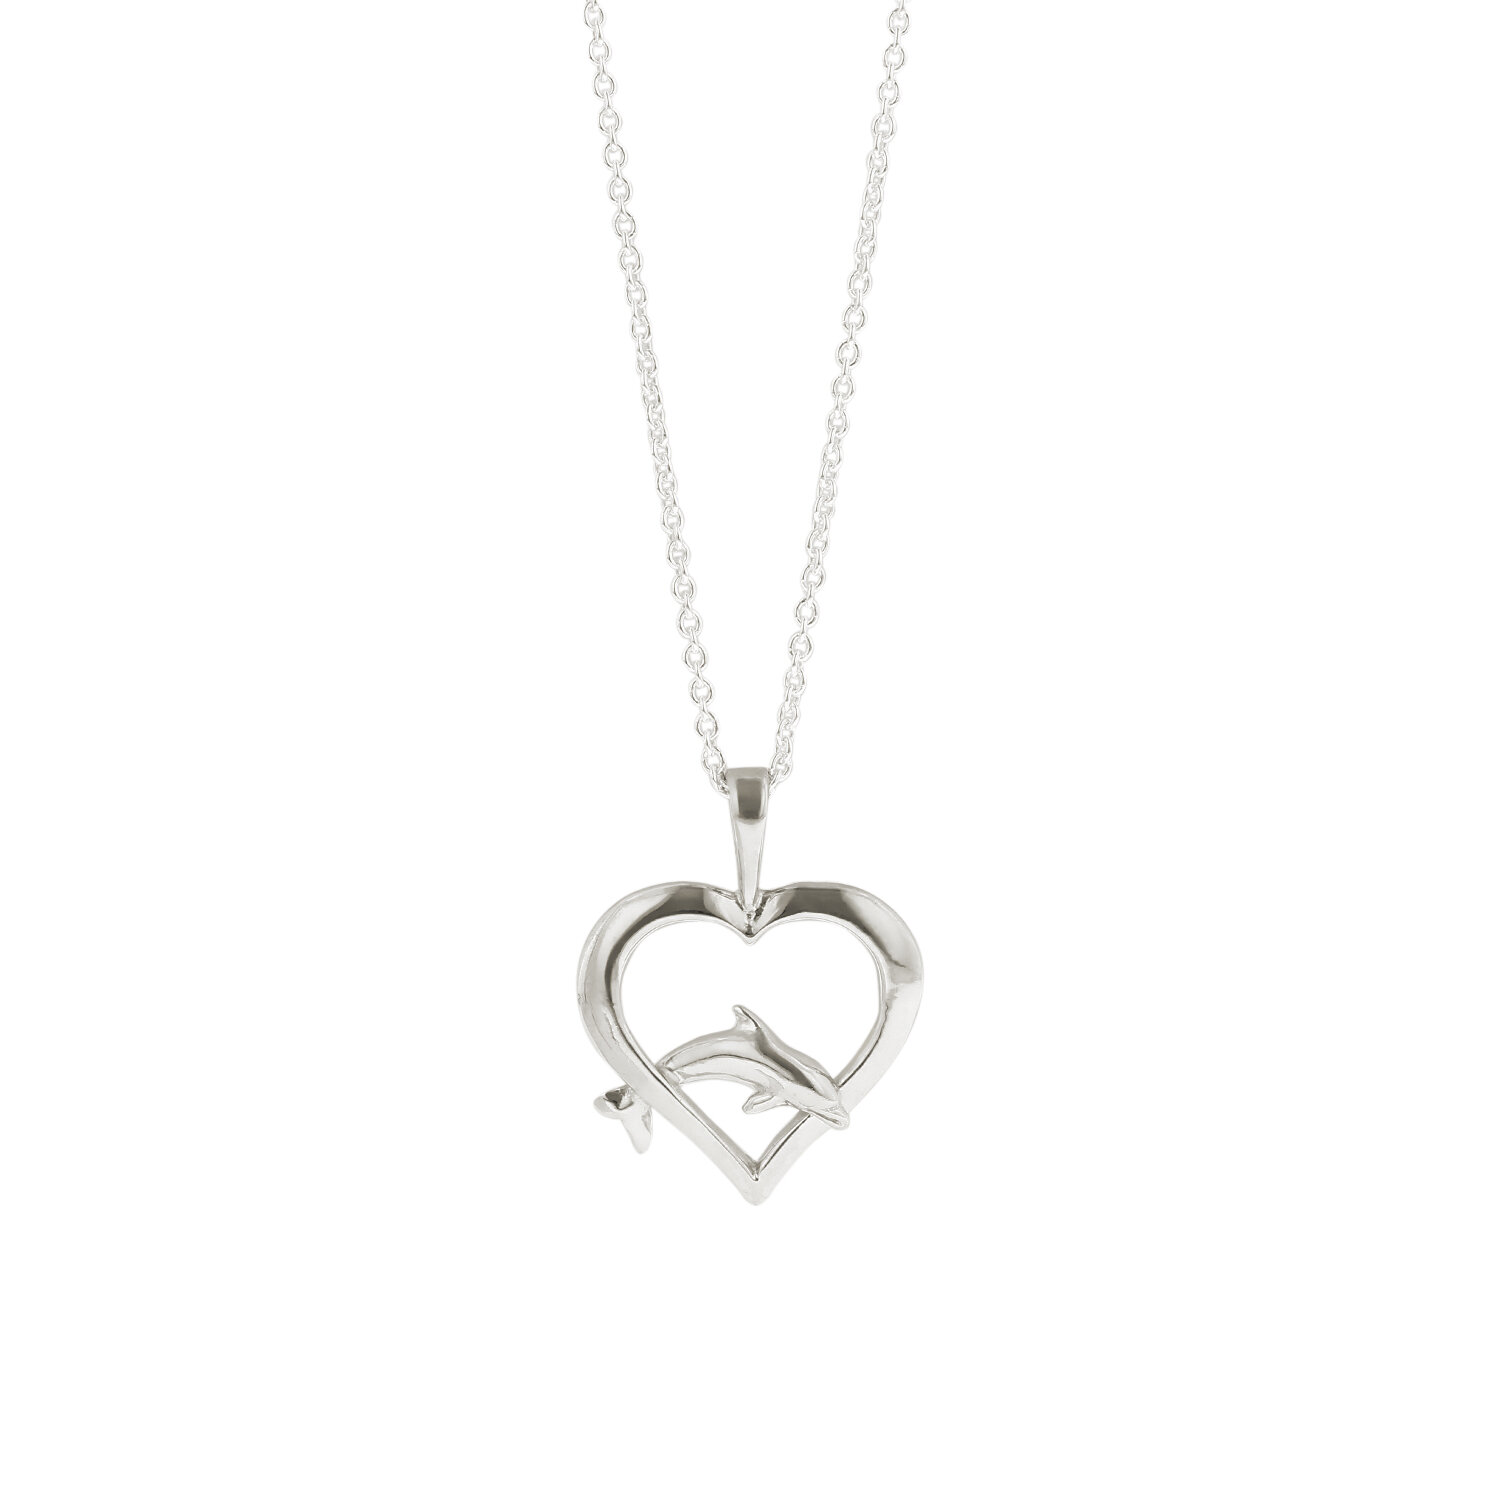 Kabana Dolphin Mother's Jewel Heart Pendant in Sterling Silver 